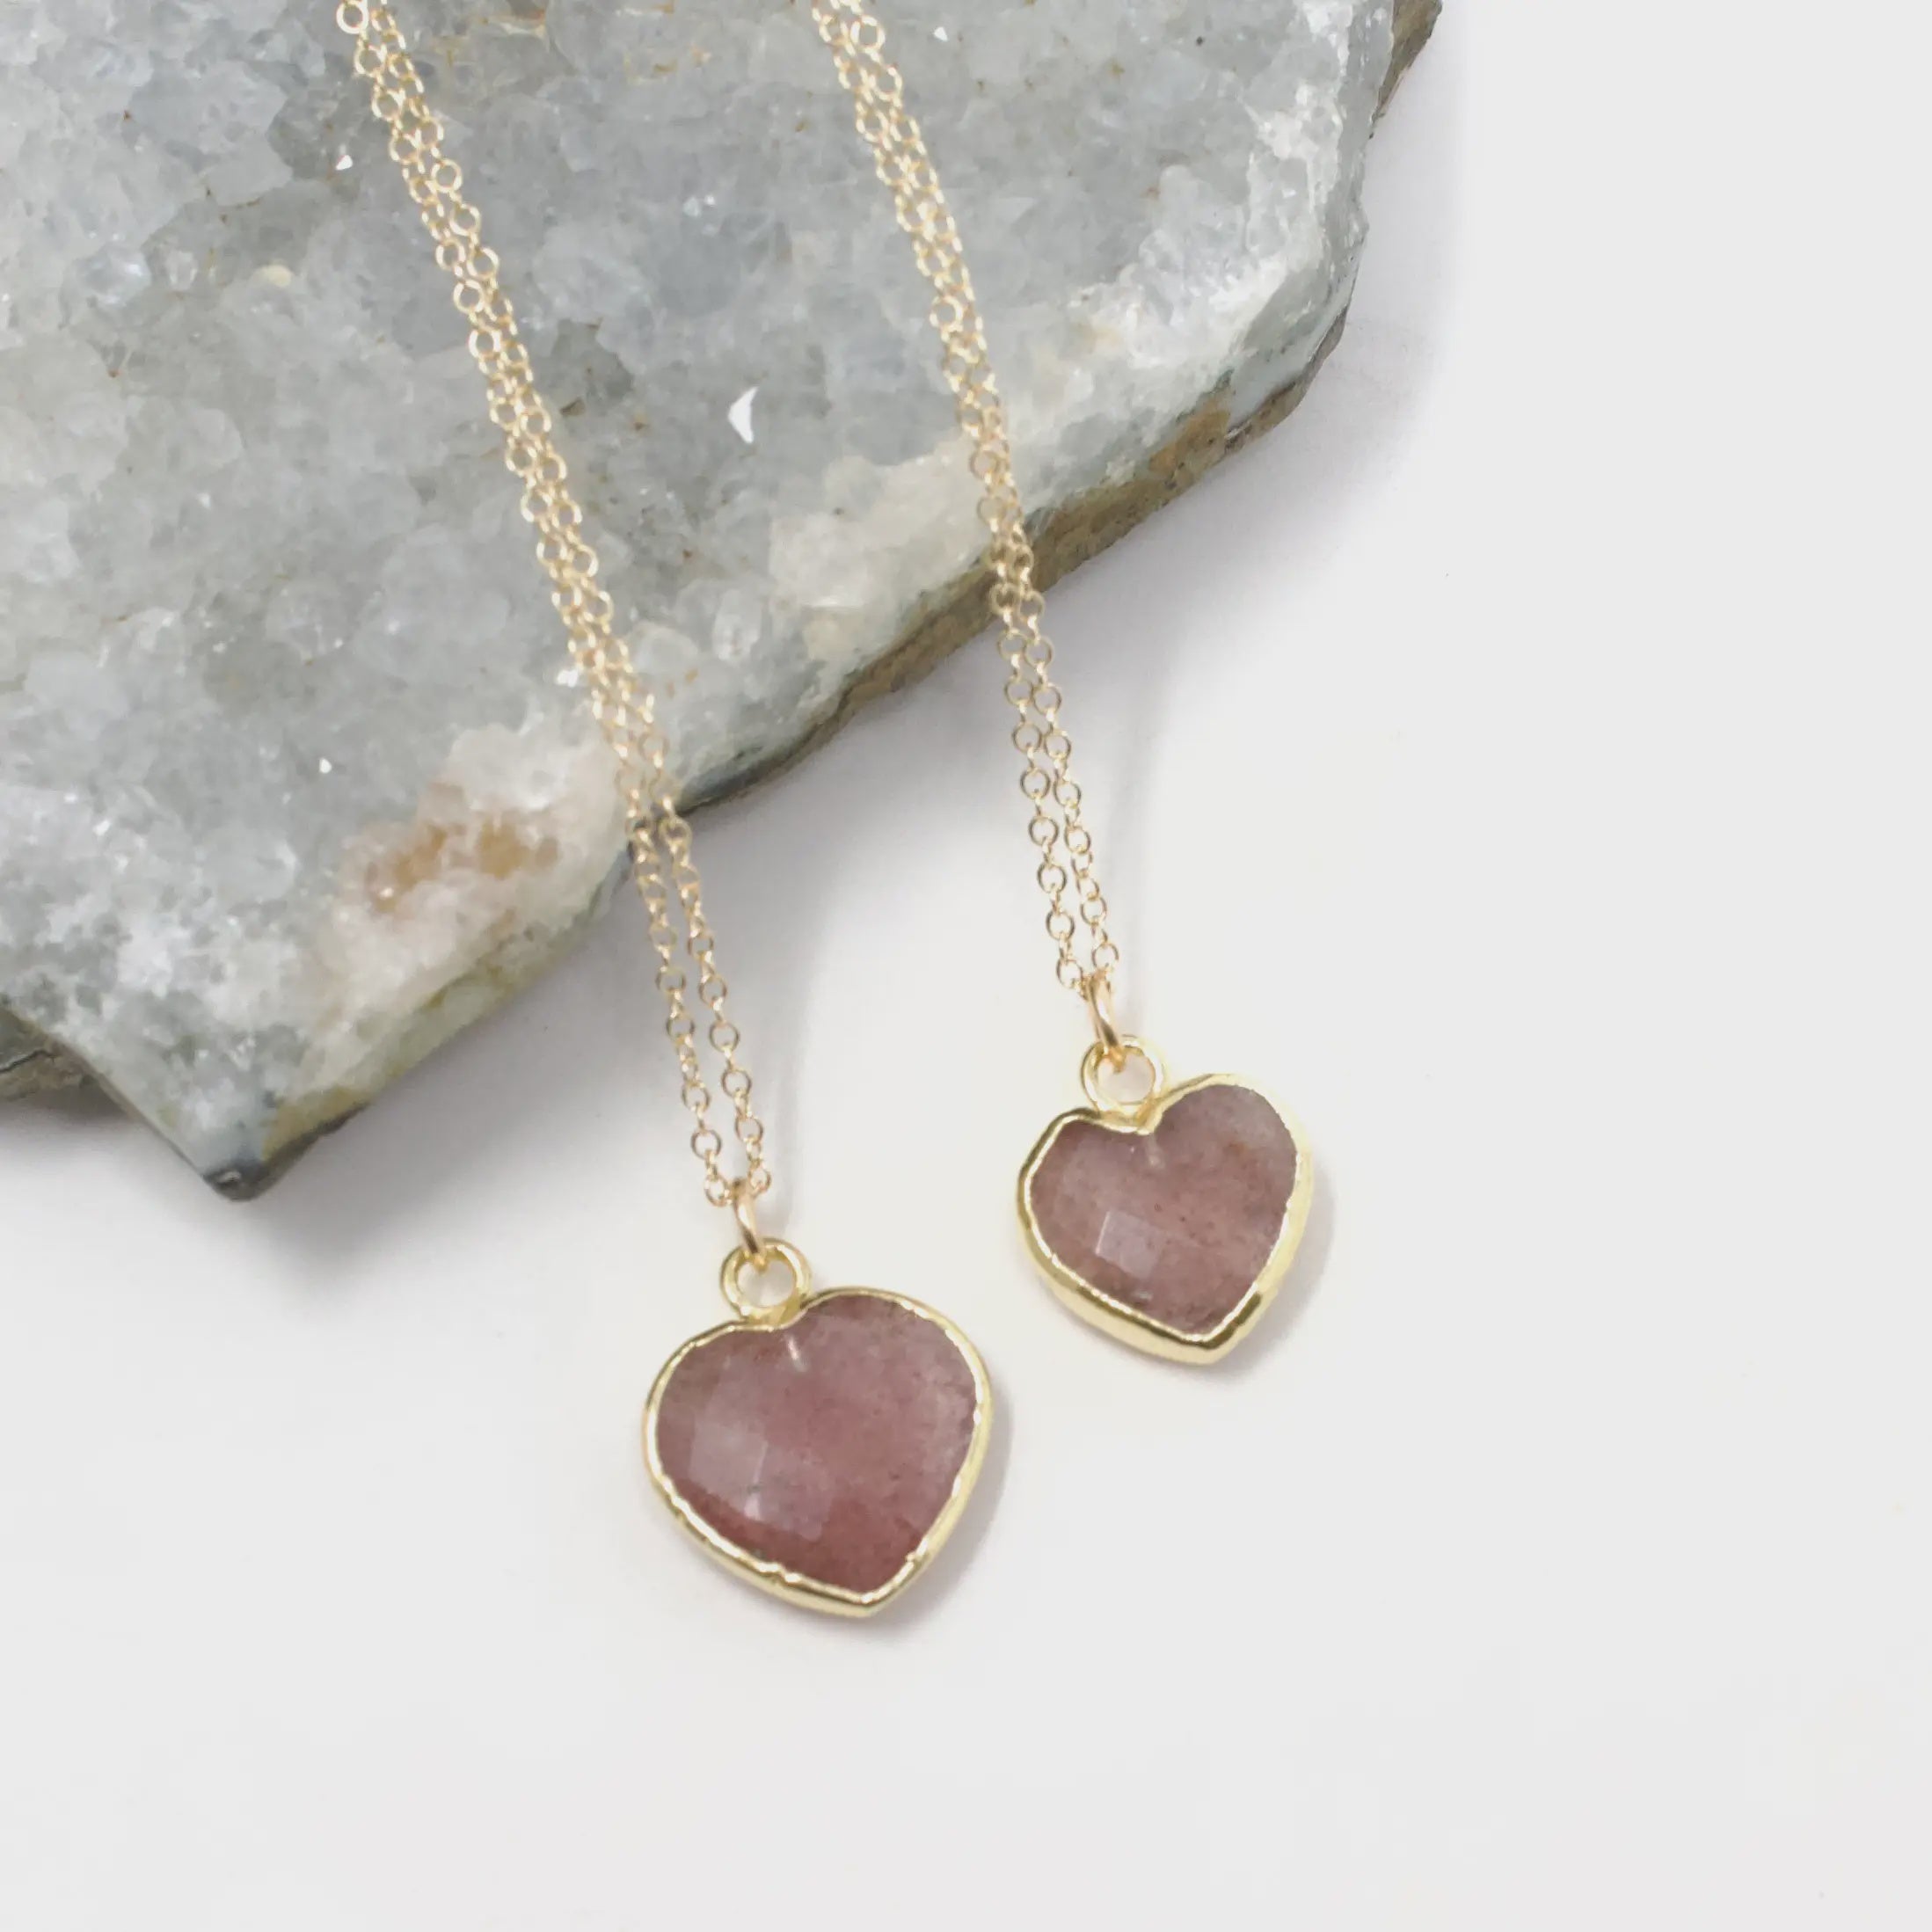 The Gemstone Heart Necklace